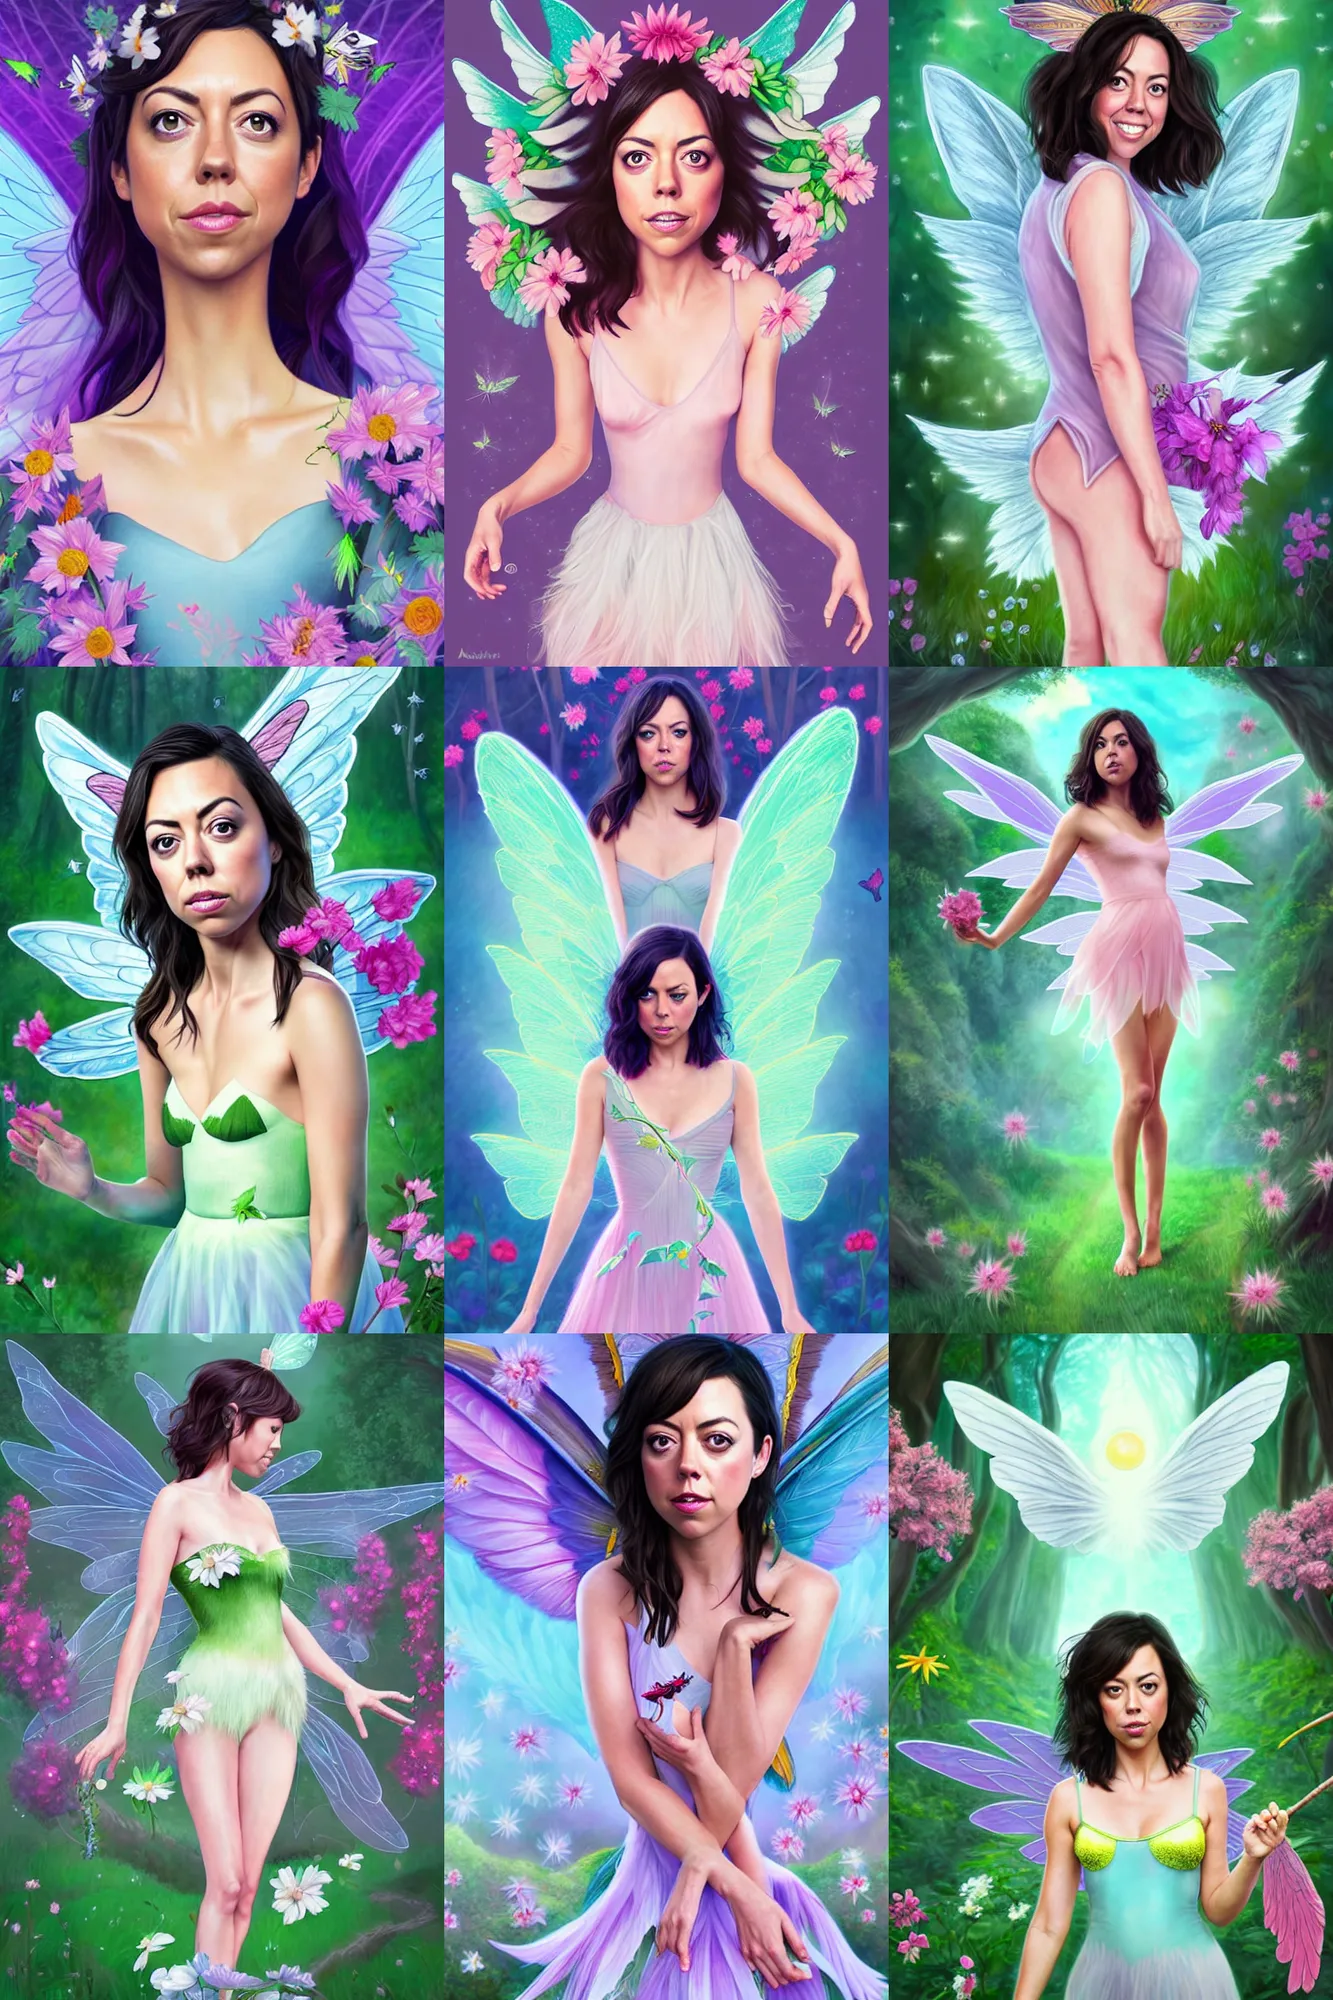 Prompt: aubrey plaza as a fairy with wings, digital art, inspired by artgerm and tinkerbell, border of flowers, flowers in hair, angelic, standing in the forest